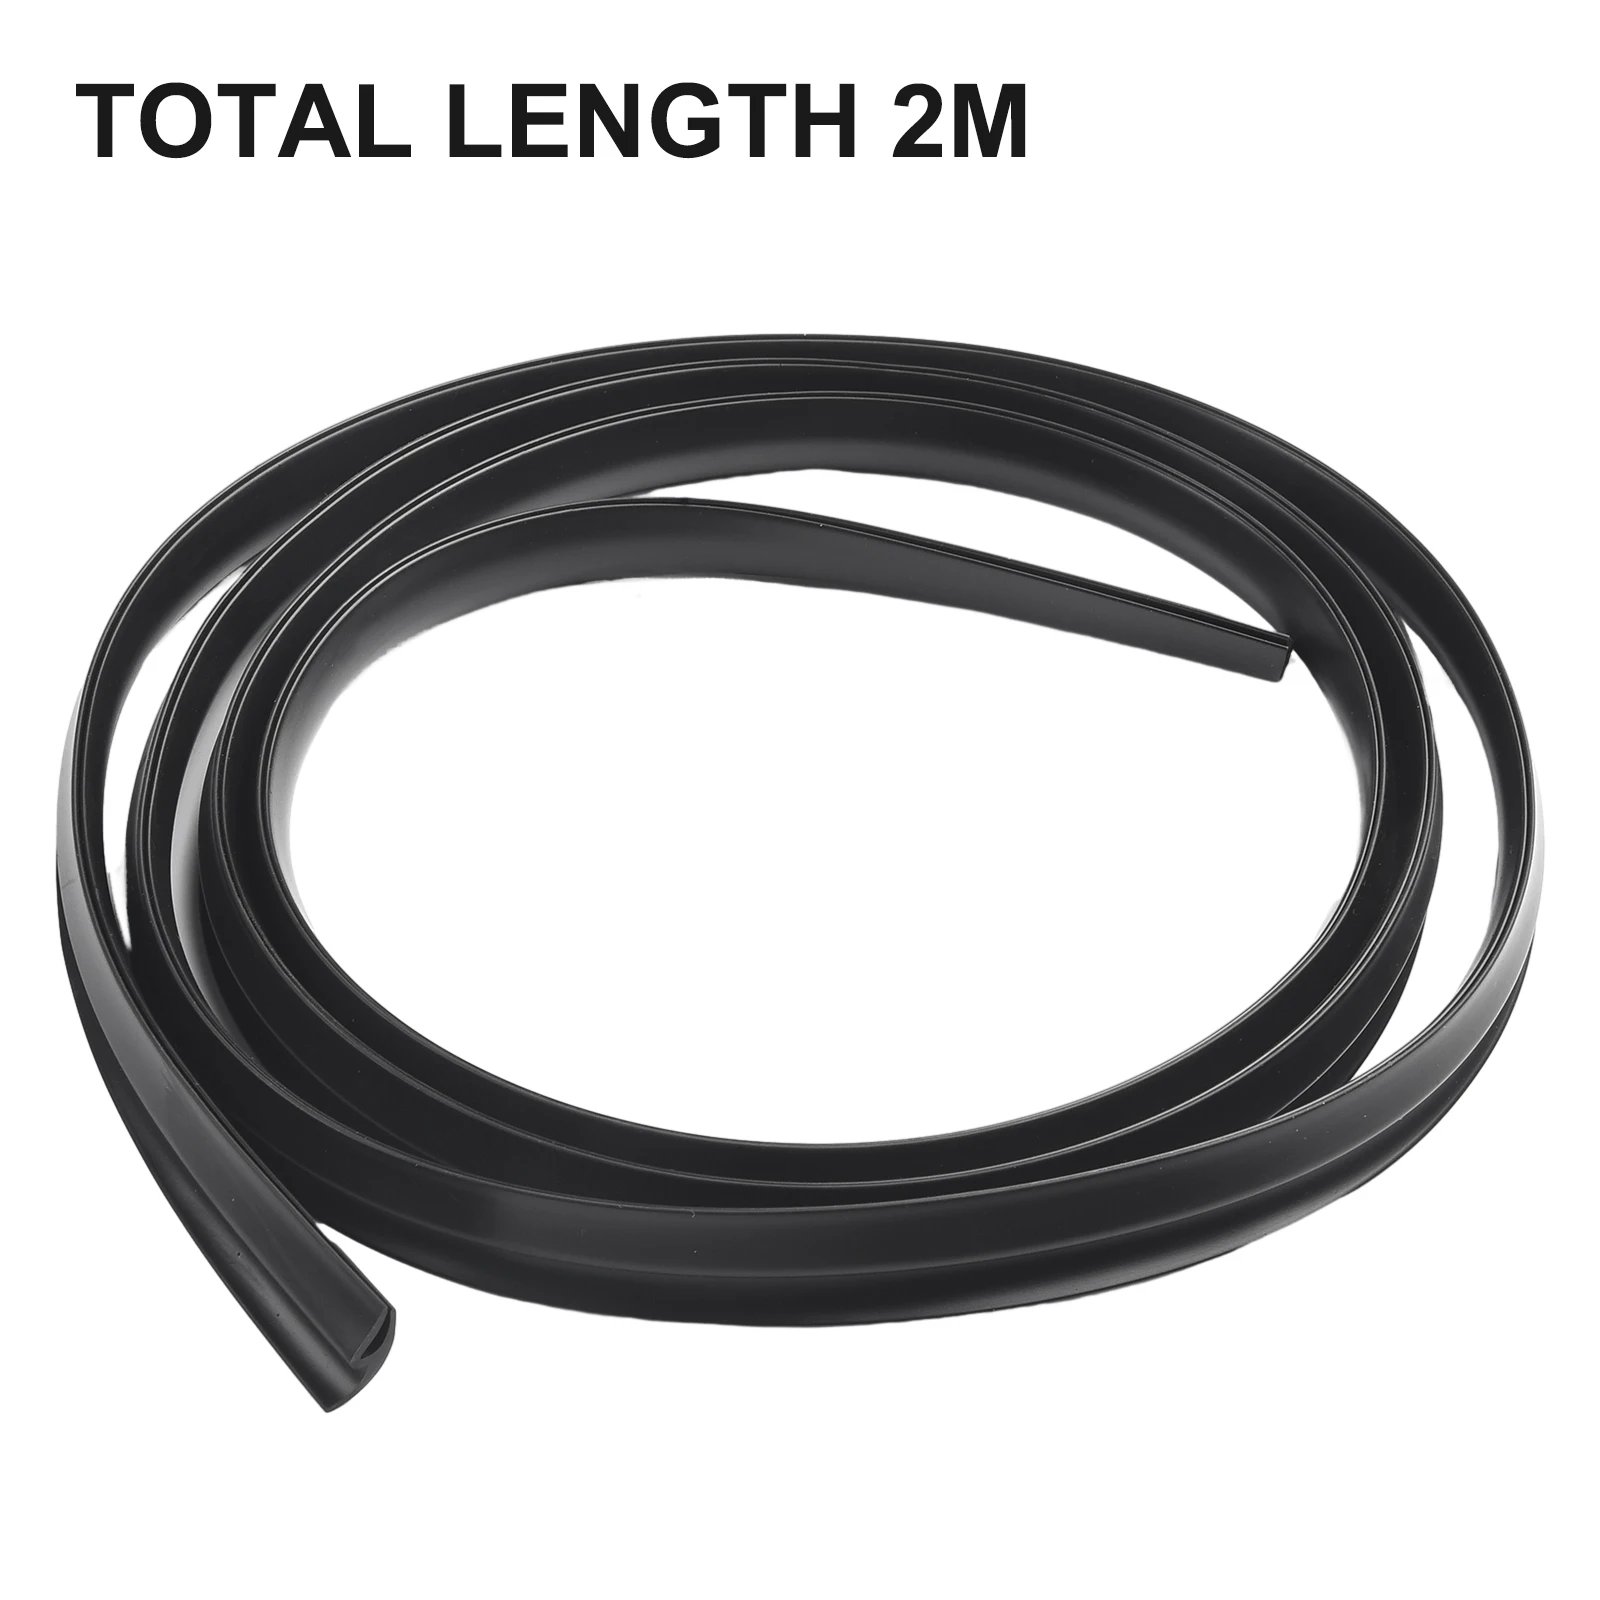 

2m Rubber Seals Edge Sealing Strips Auto Roof Windshield Car Rubber Sealant Protector Seal Strip Window Seals Car Accessories